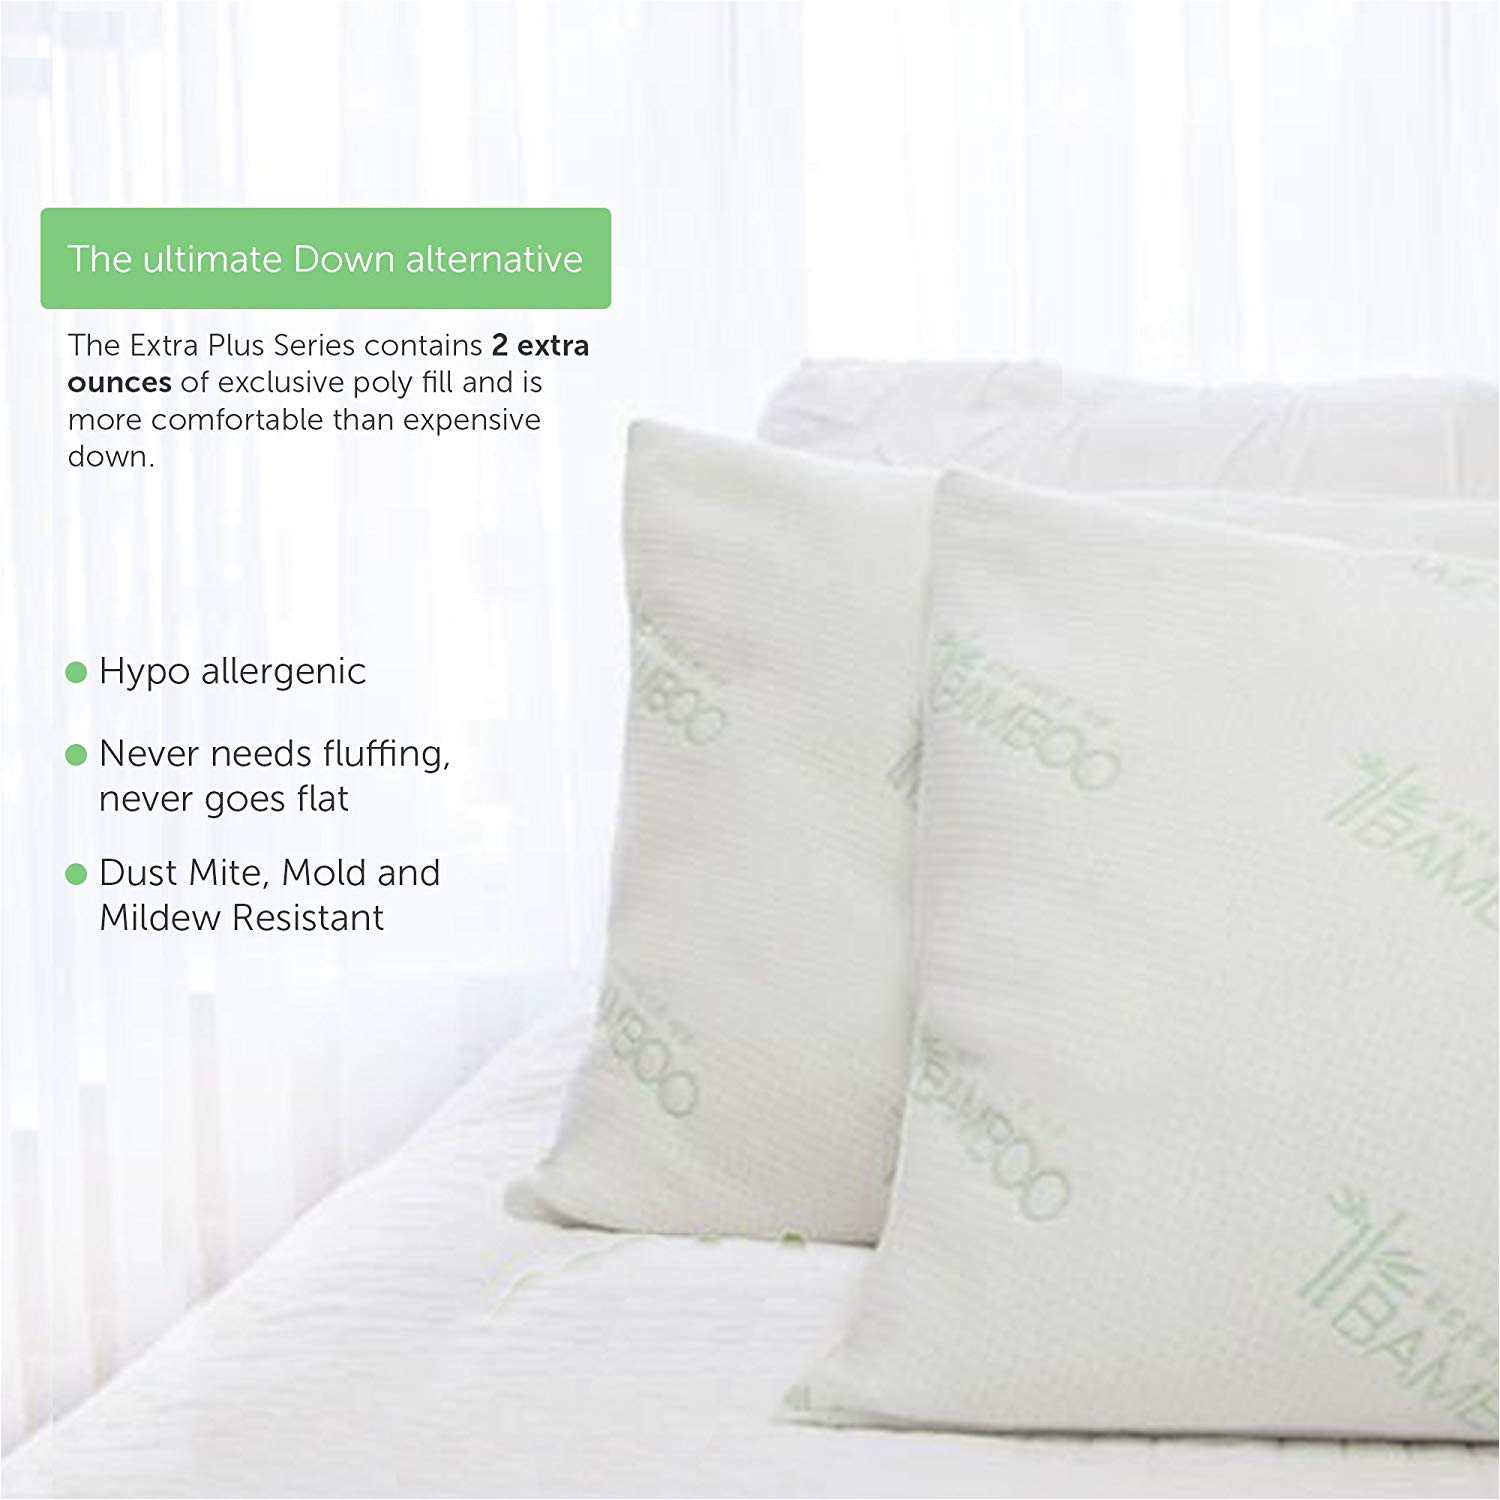 amazon com ultimate essence of bamboo derived rayon pillow extra plush edition down alternative hypoallergenic poly bed pillows with bamboo derived